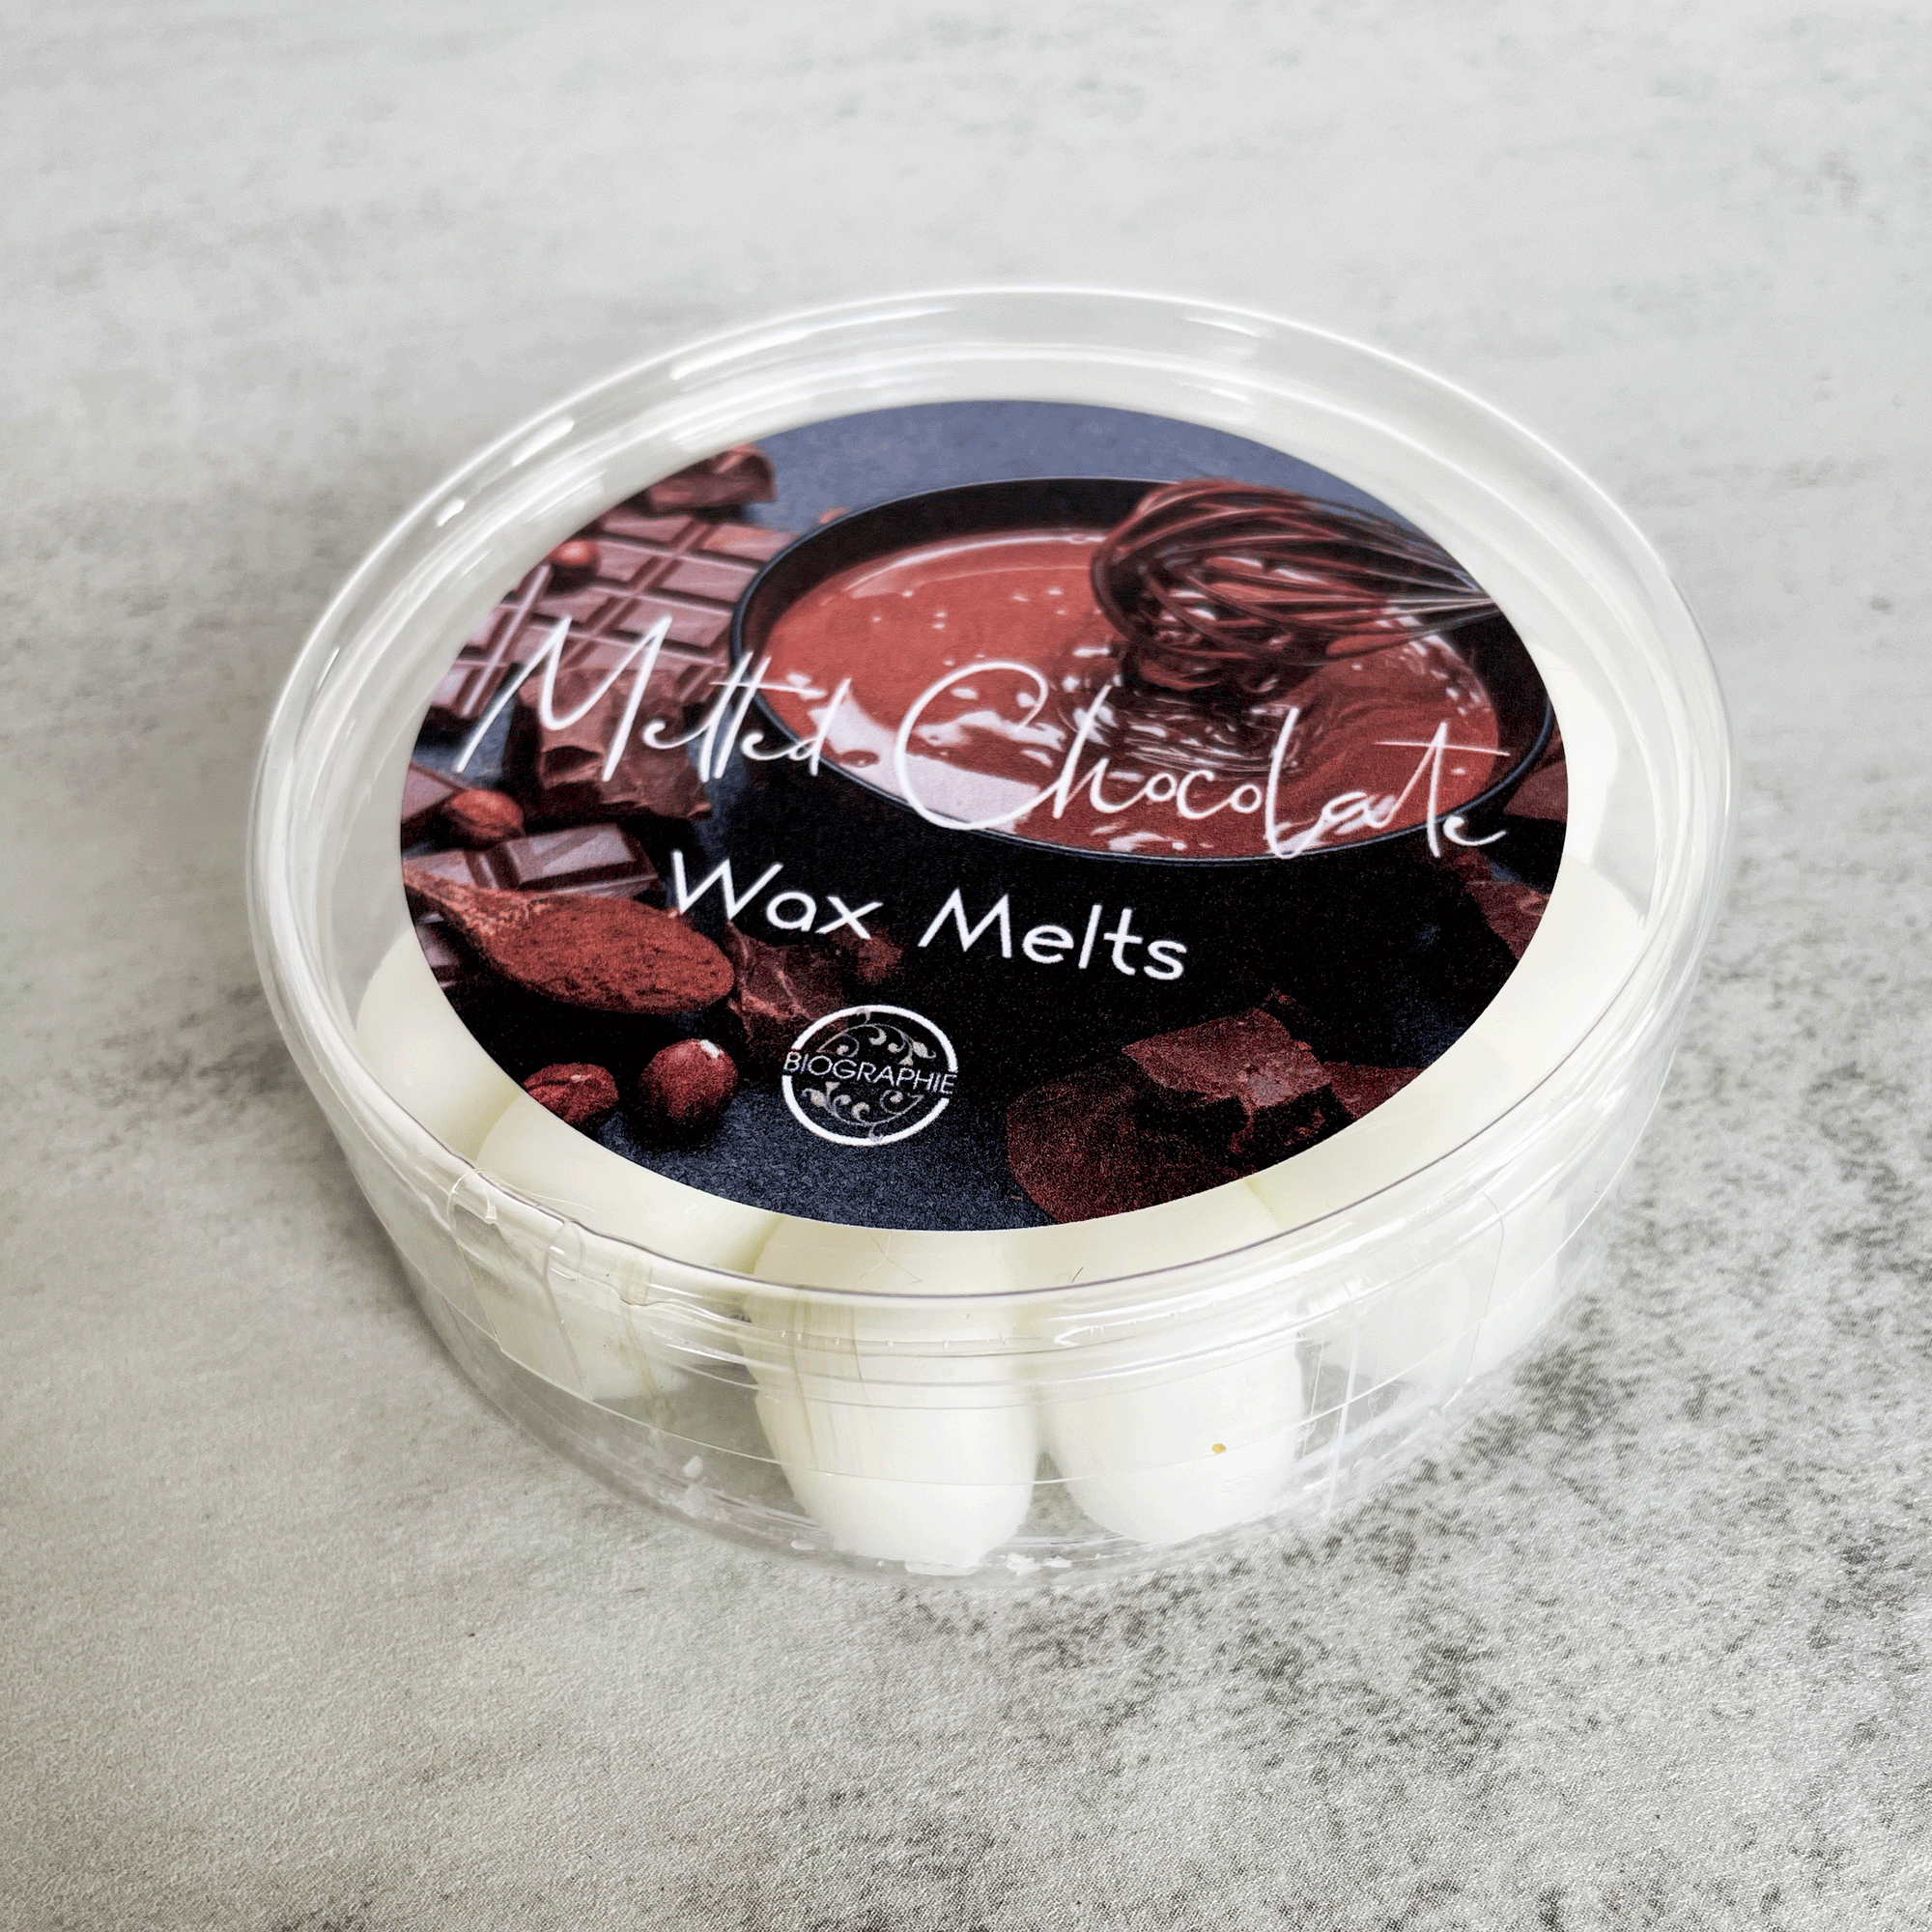 Melted Chocolate Wax Melts